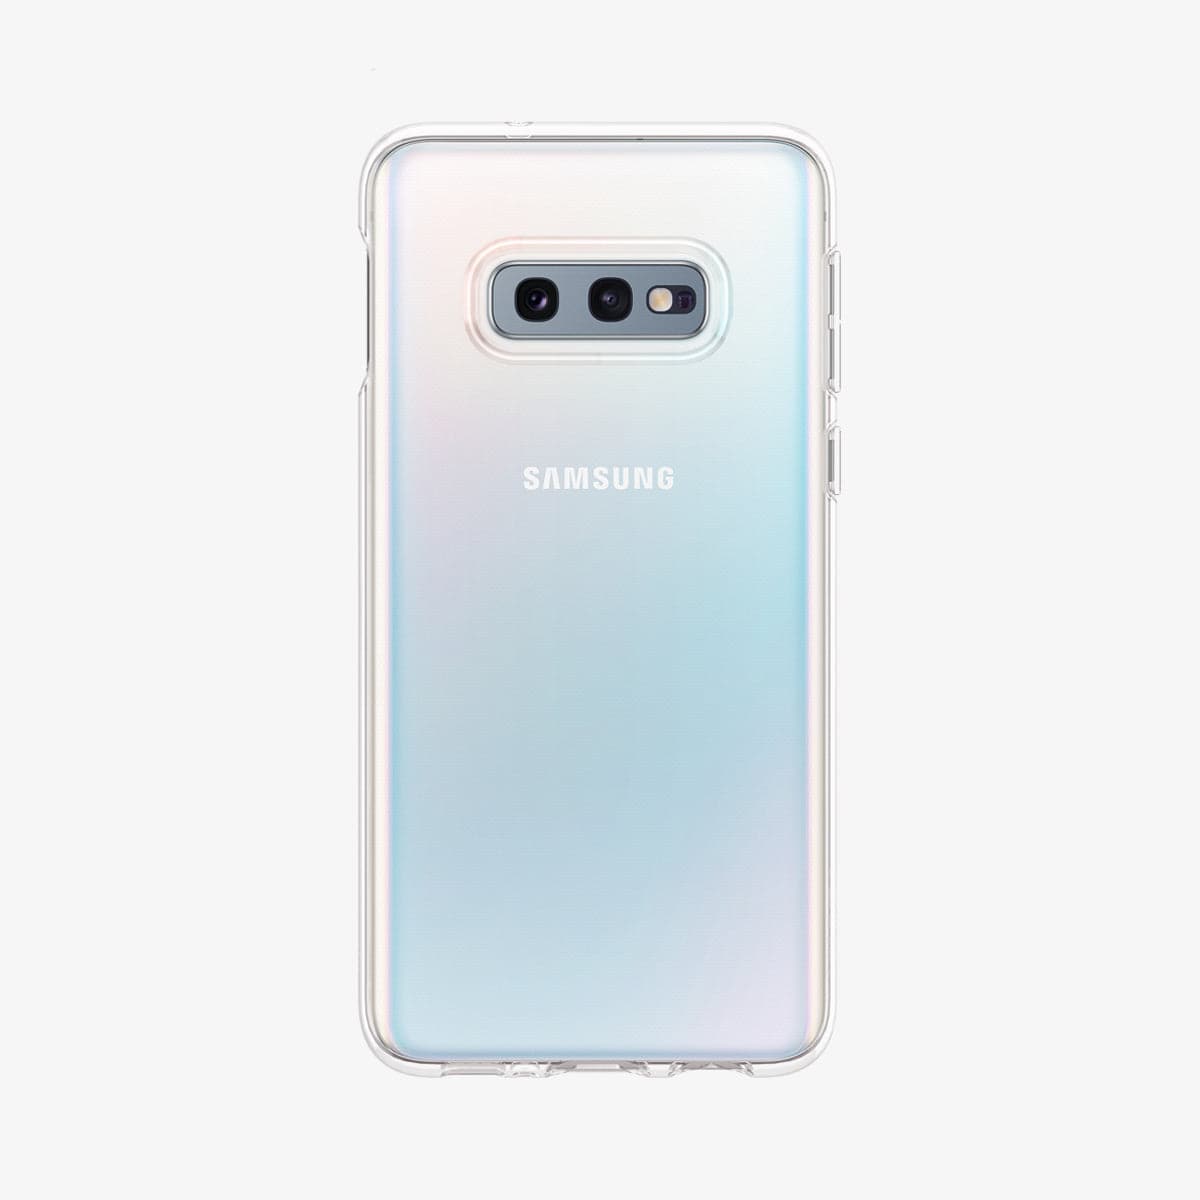 609CS25833 - Galaxy S10e Liquid Crystal Case in crystal clear showing the back